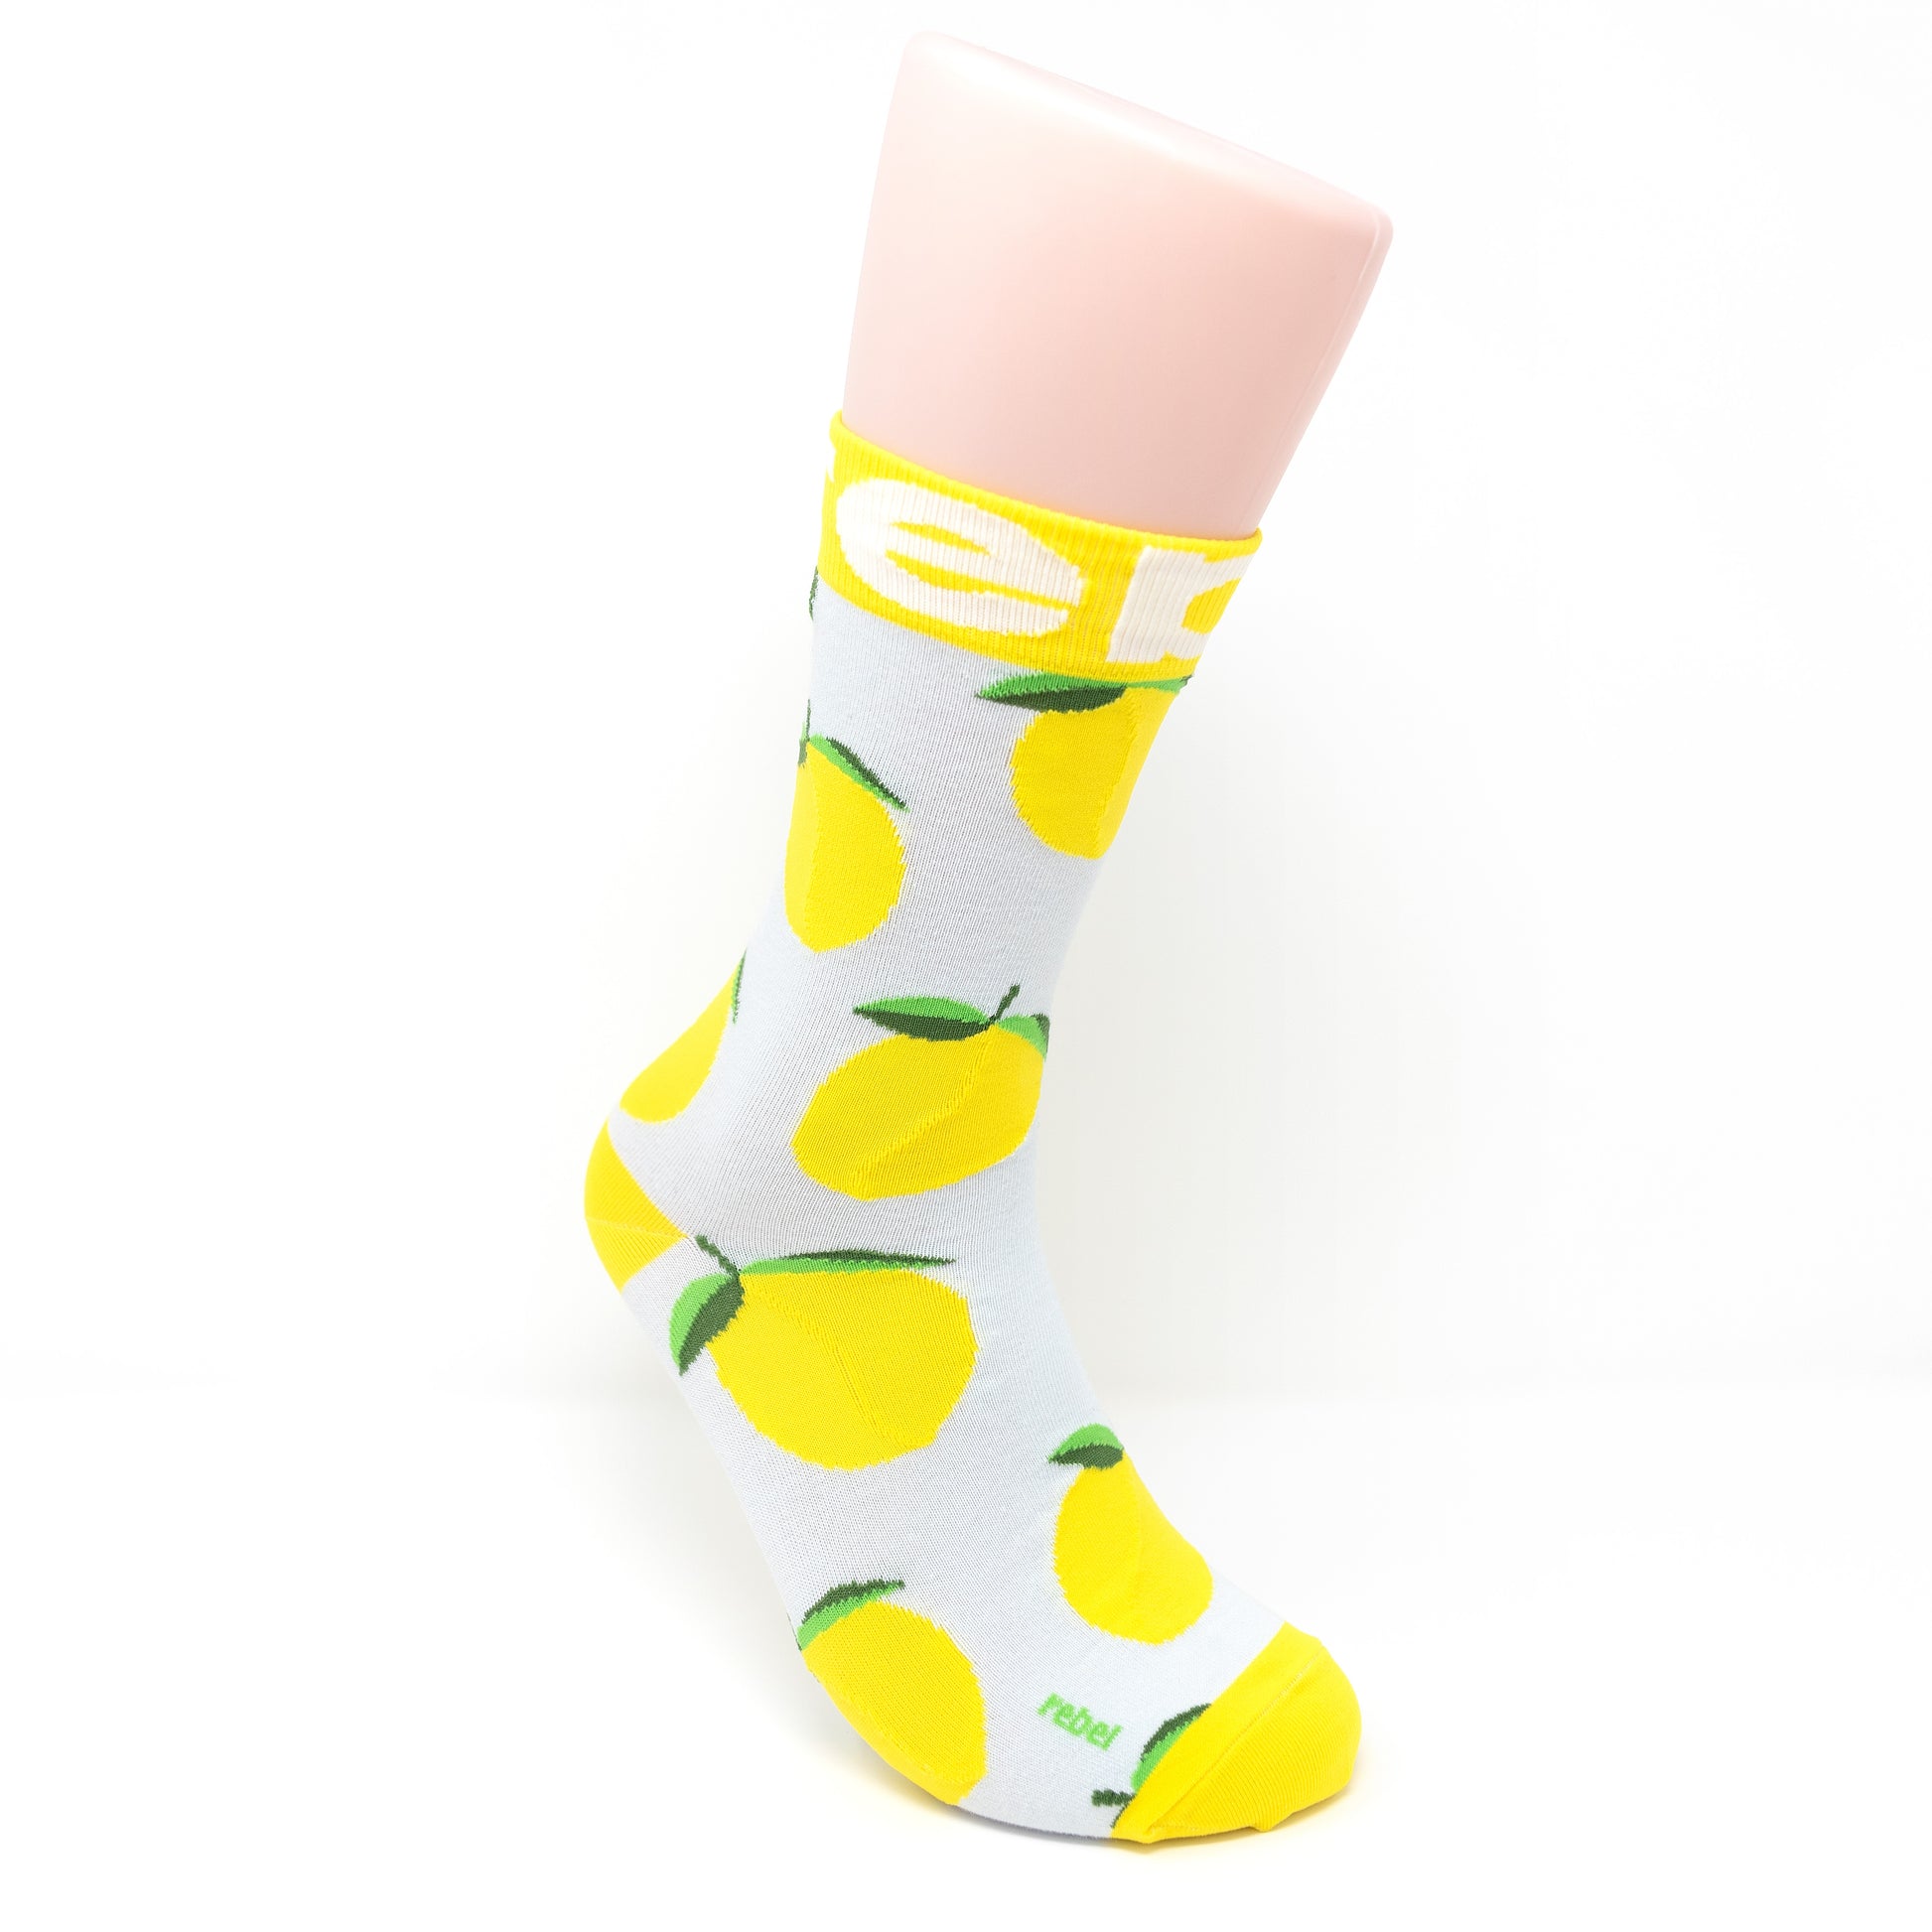 Featuring a bright and bold lemon pattern, these socks are perfect for adding a pop of colour to your outfit.